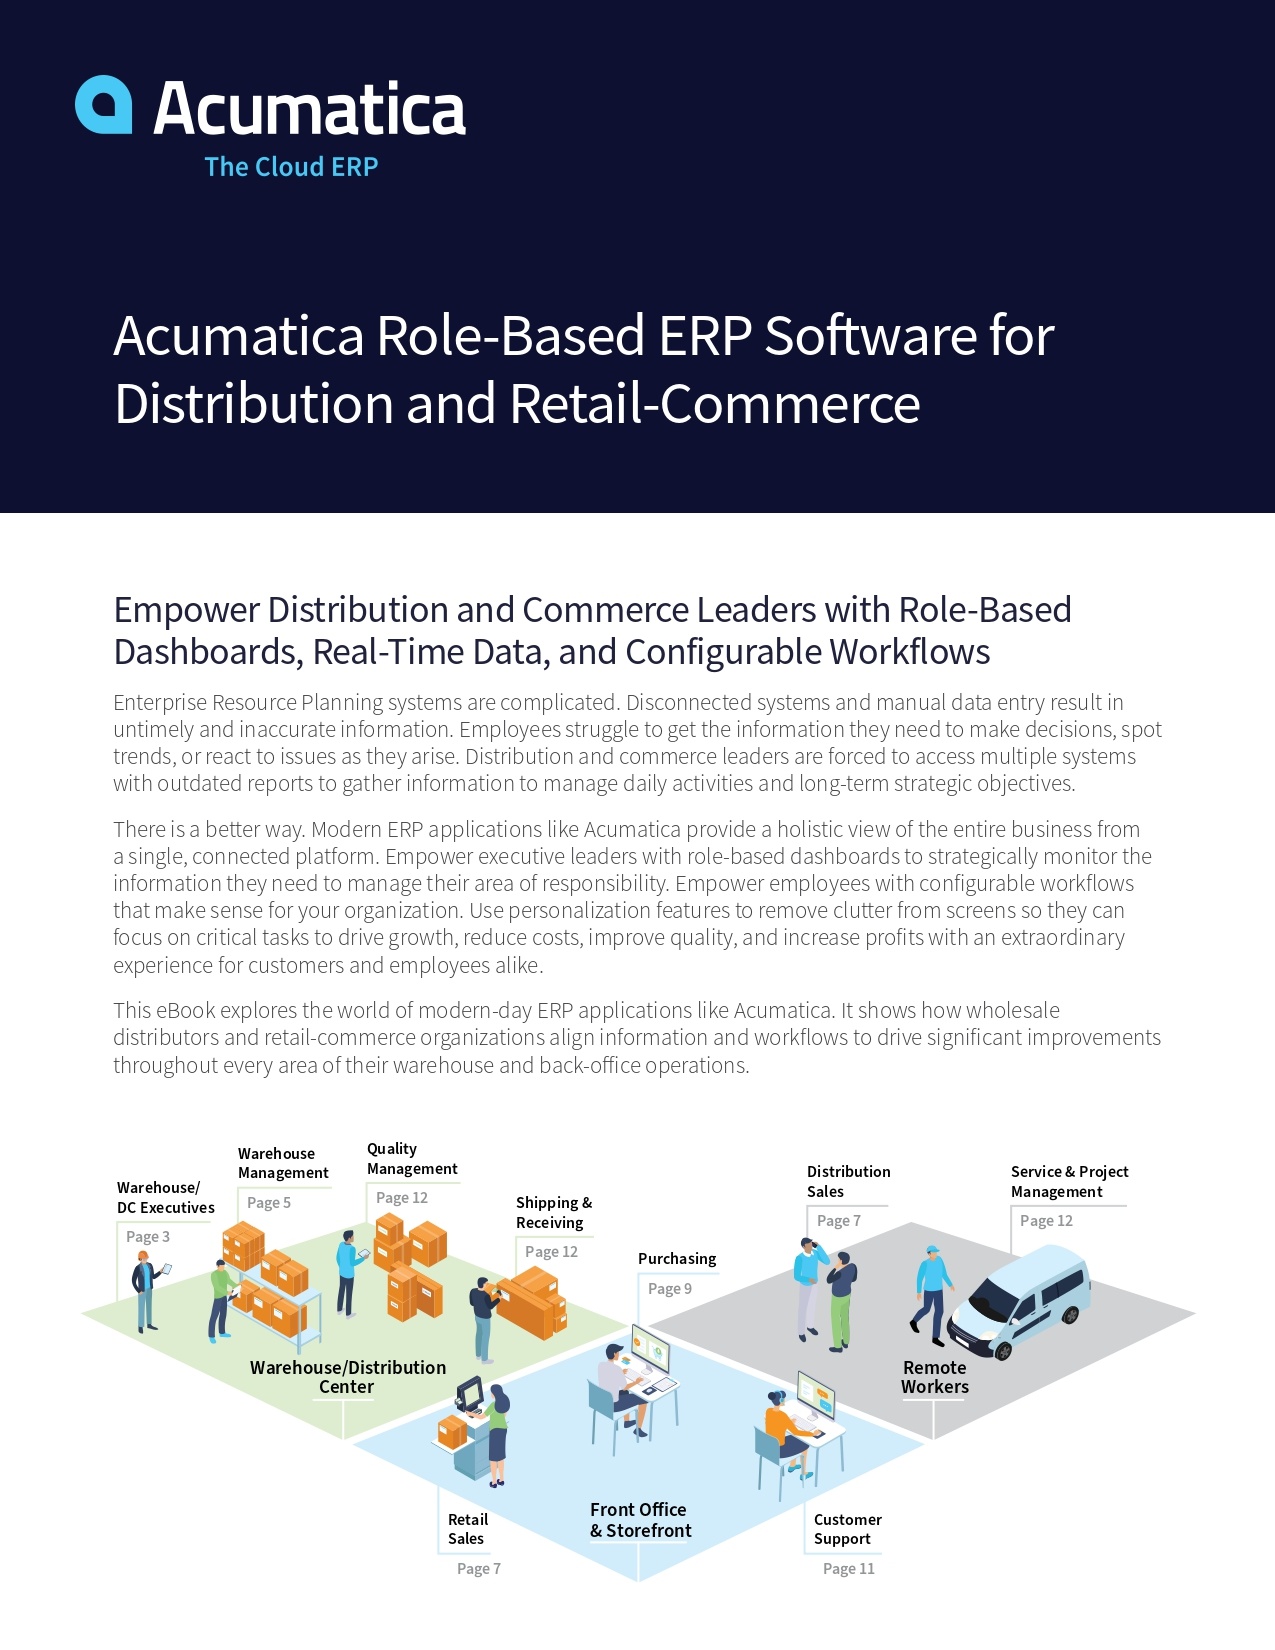 Best ERP Software for Wholesale Distribution and Retail-Commerce